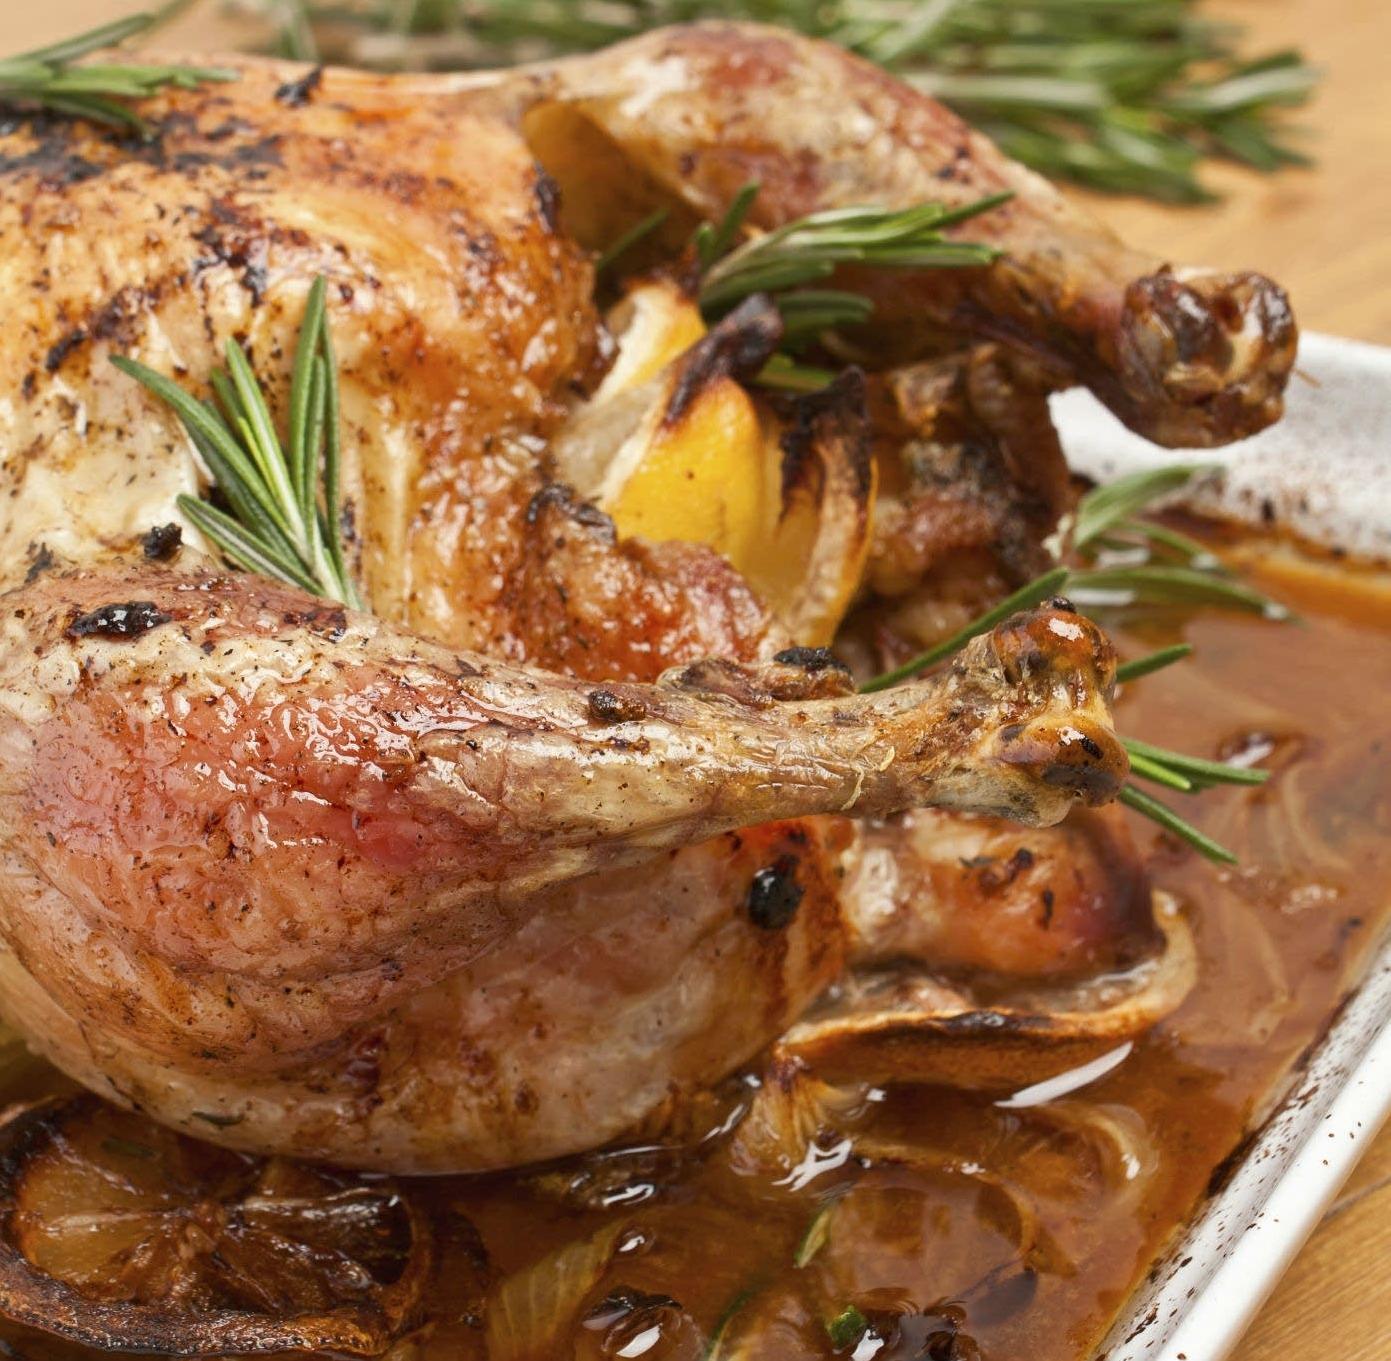  Basting the bird with the subtle flavors of white wine, herbs, and spices gives every bite a juicy and aromatic taste.